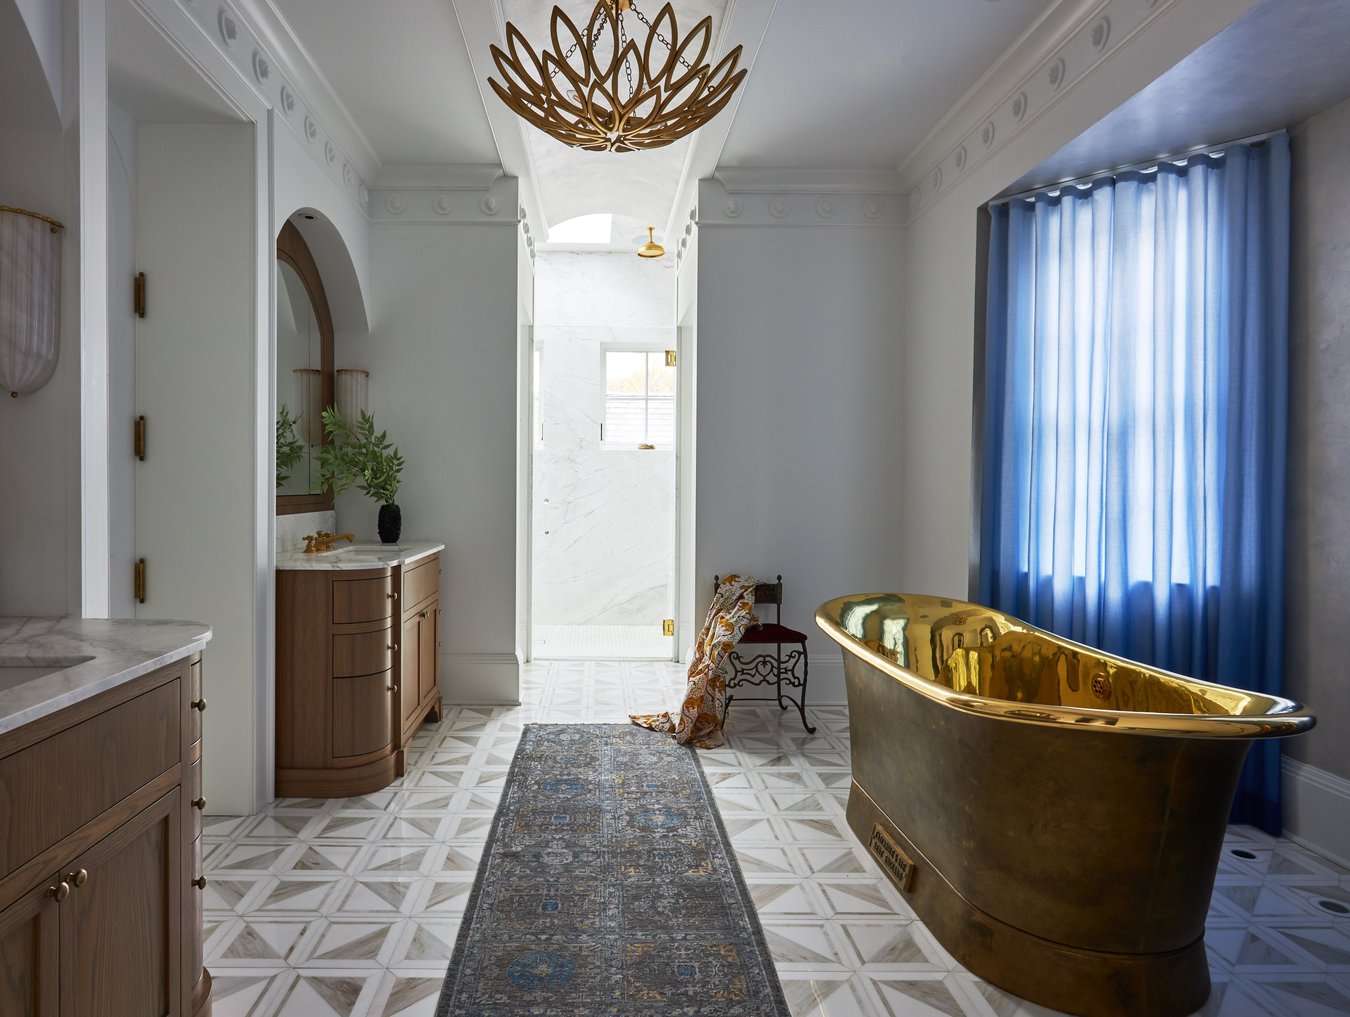 A beautiful bathroom designed by Jasmin Reese with a large copper bathtub, a copper chandelier, a small iron chair, and a long gray rug on geometric flooring, in Chicago, USA. 